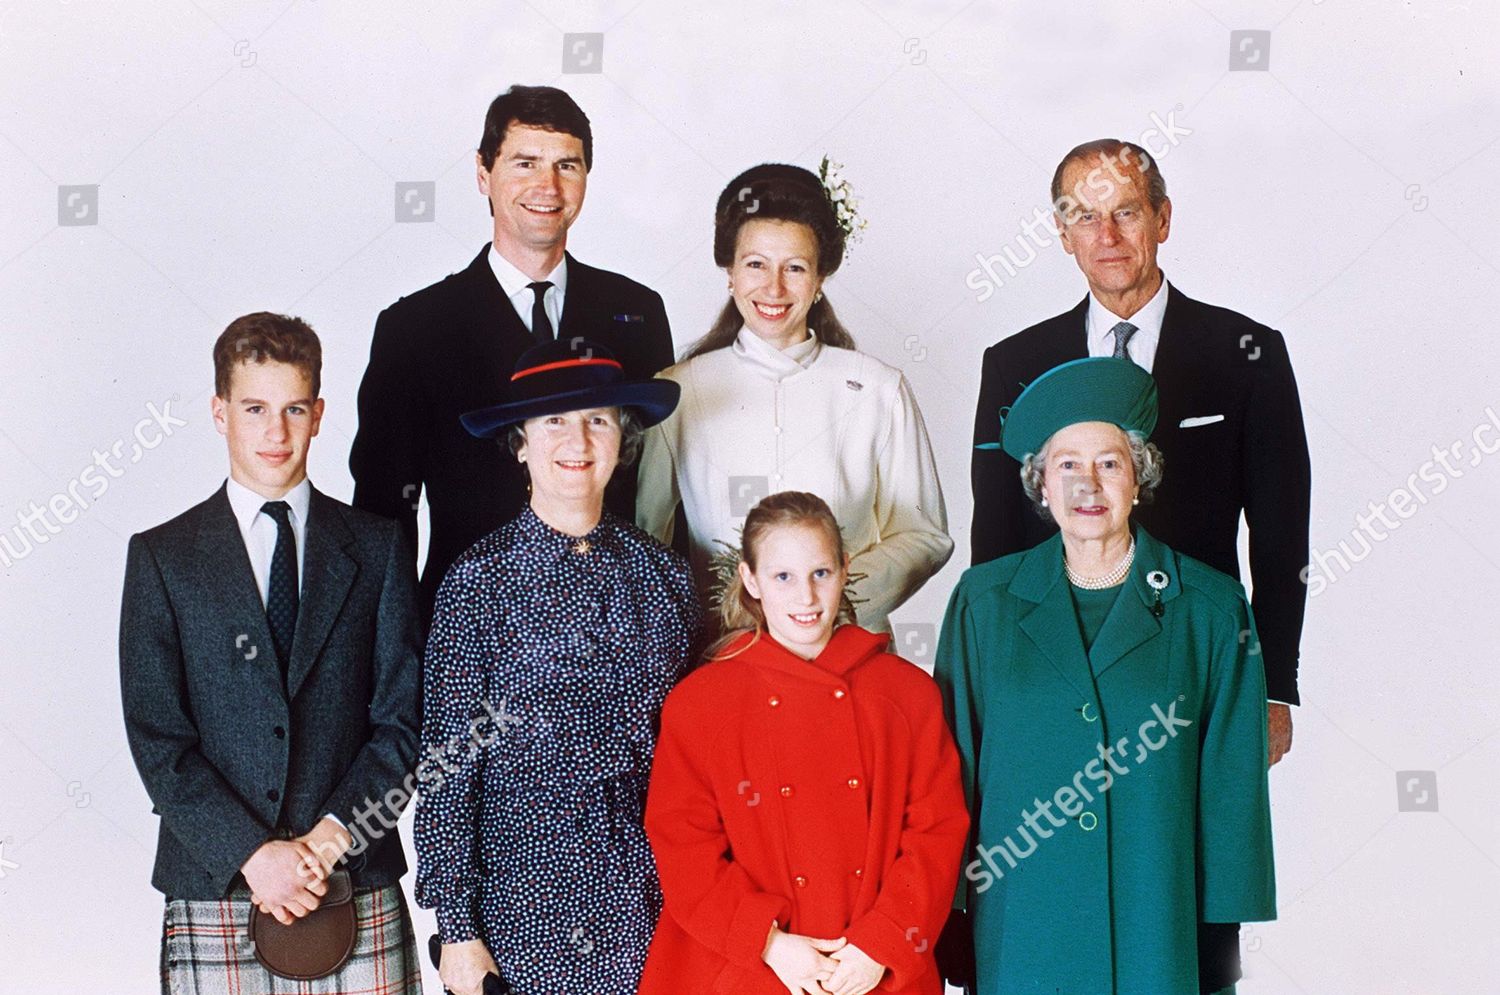 wedding-of-princess-anne-and-timothy-laurence-at-the-crathie-church-balmoral-scotland-1992-shutterstock-editorial-209035h.jpg